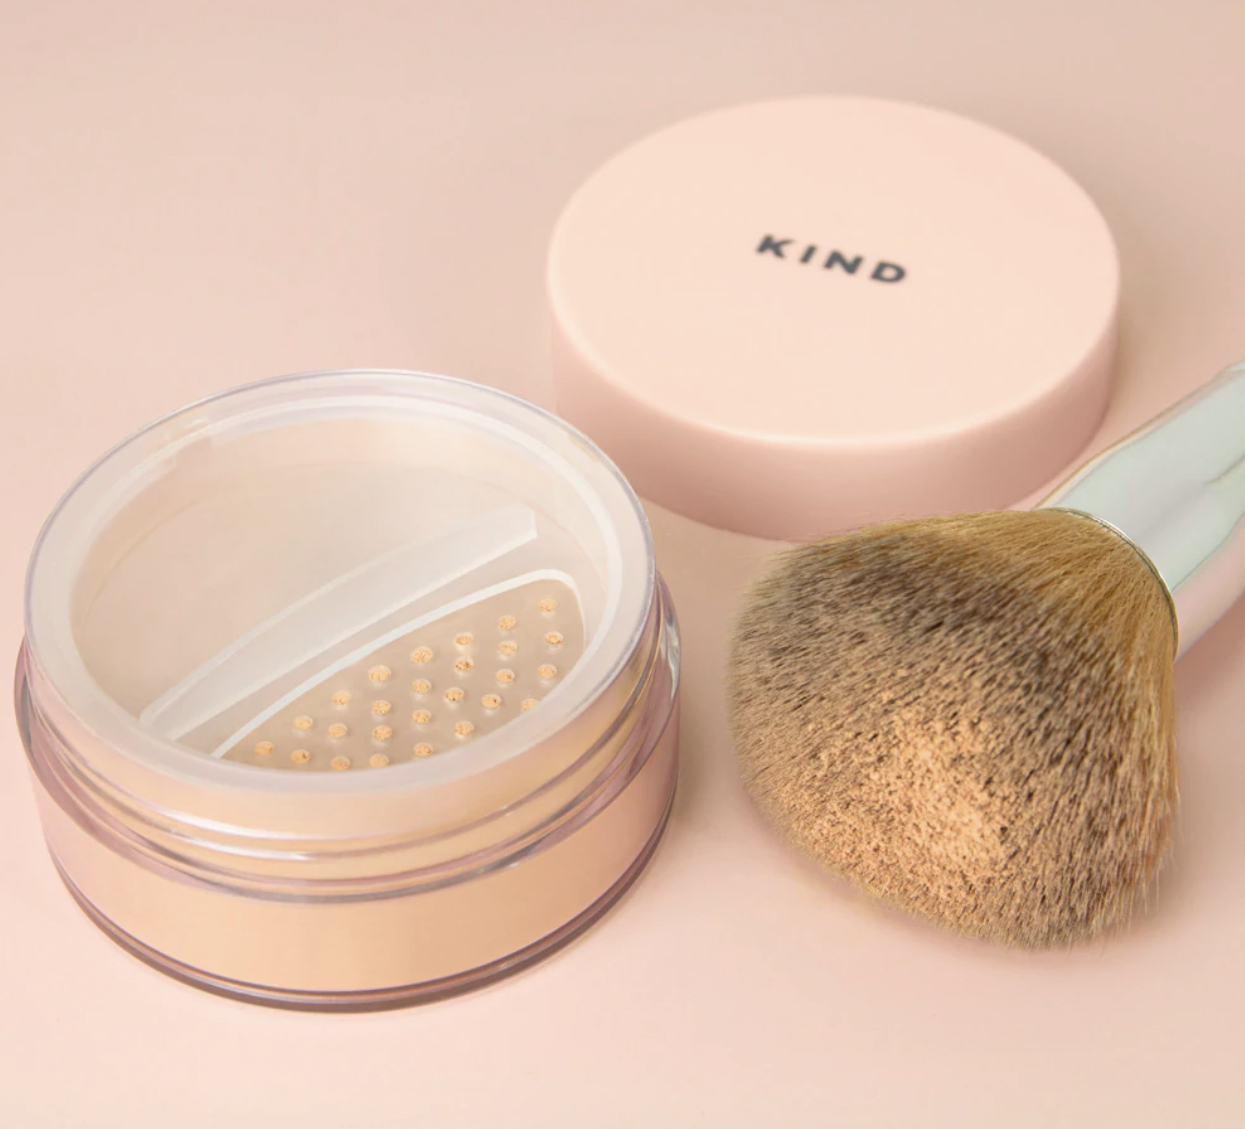 the kind collective beauty brand